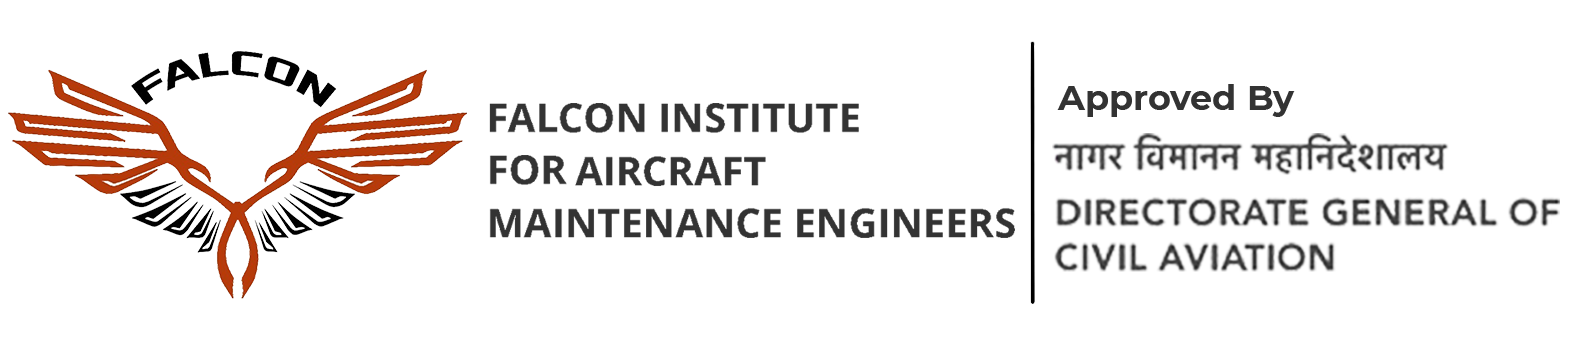 Falcon Institution of Aviation